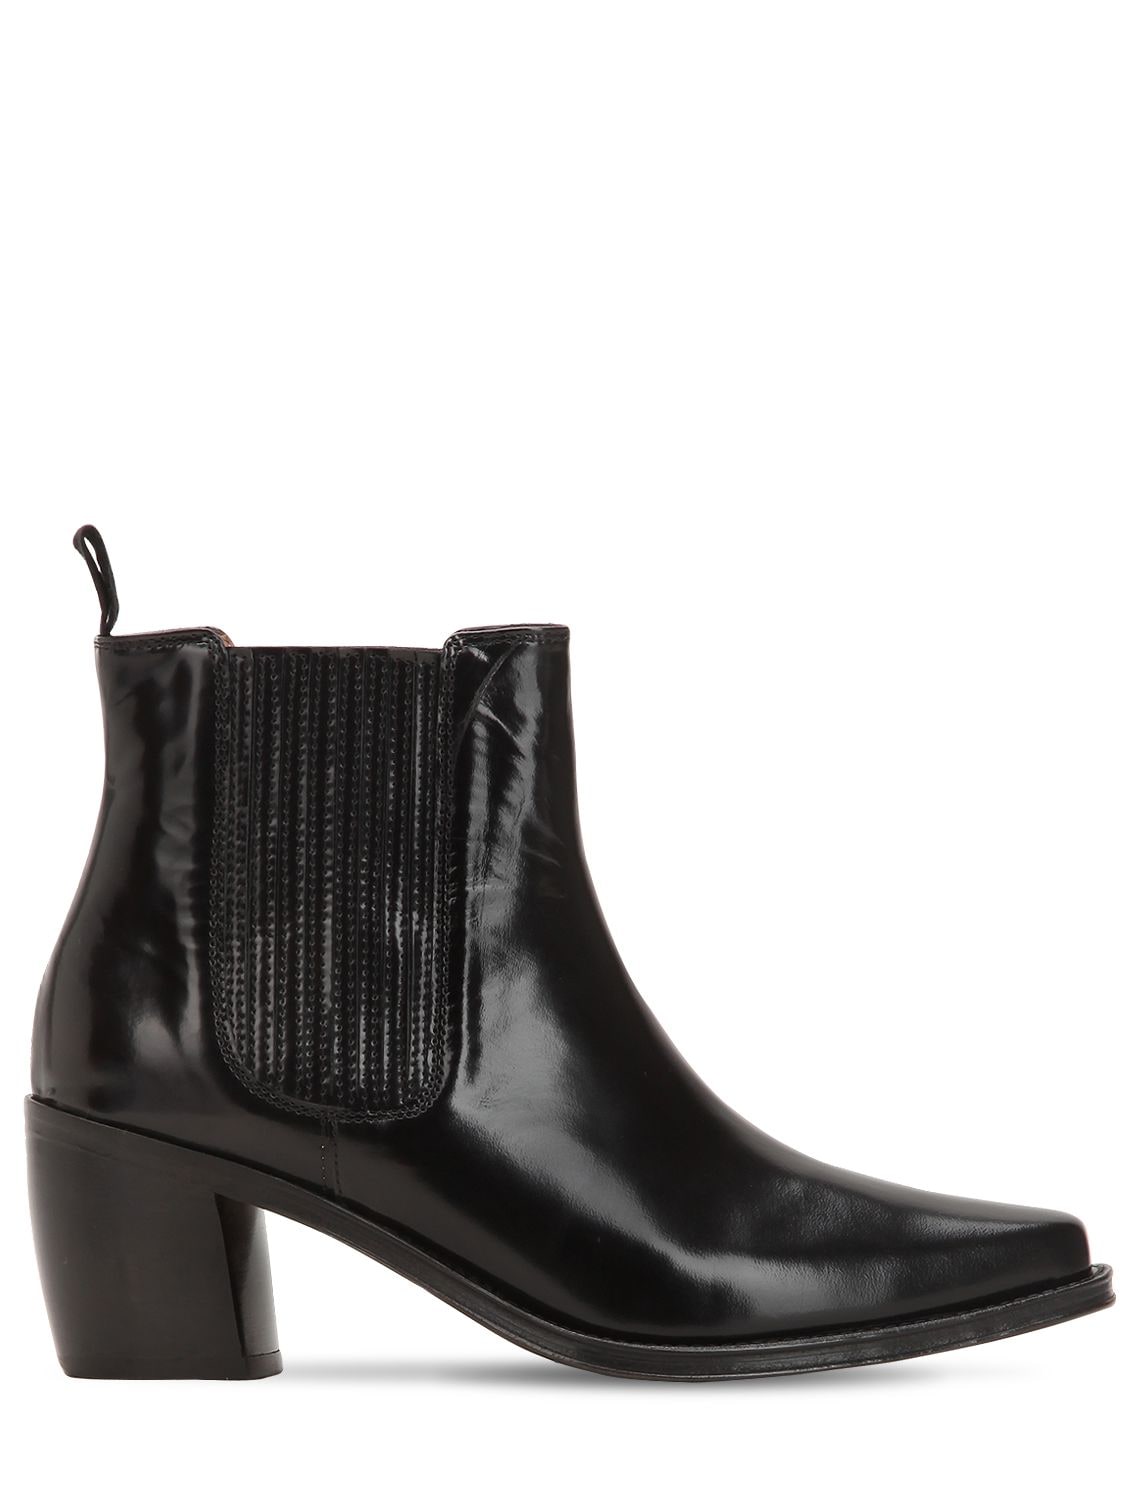 Alexa Chung 70MM LEATHER ANKLE BOOTS